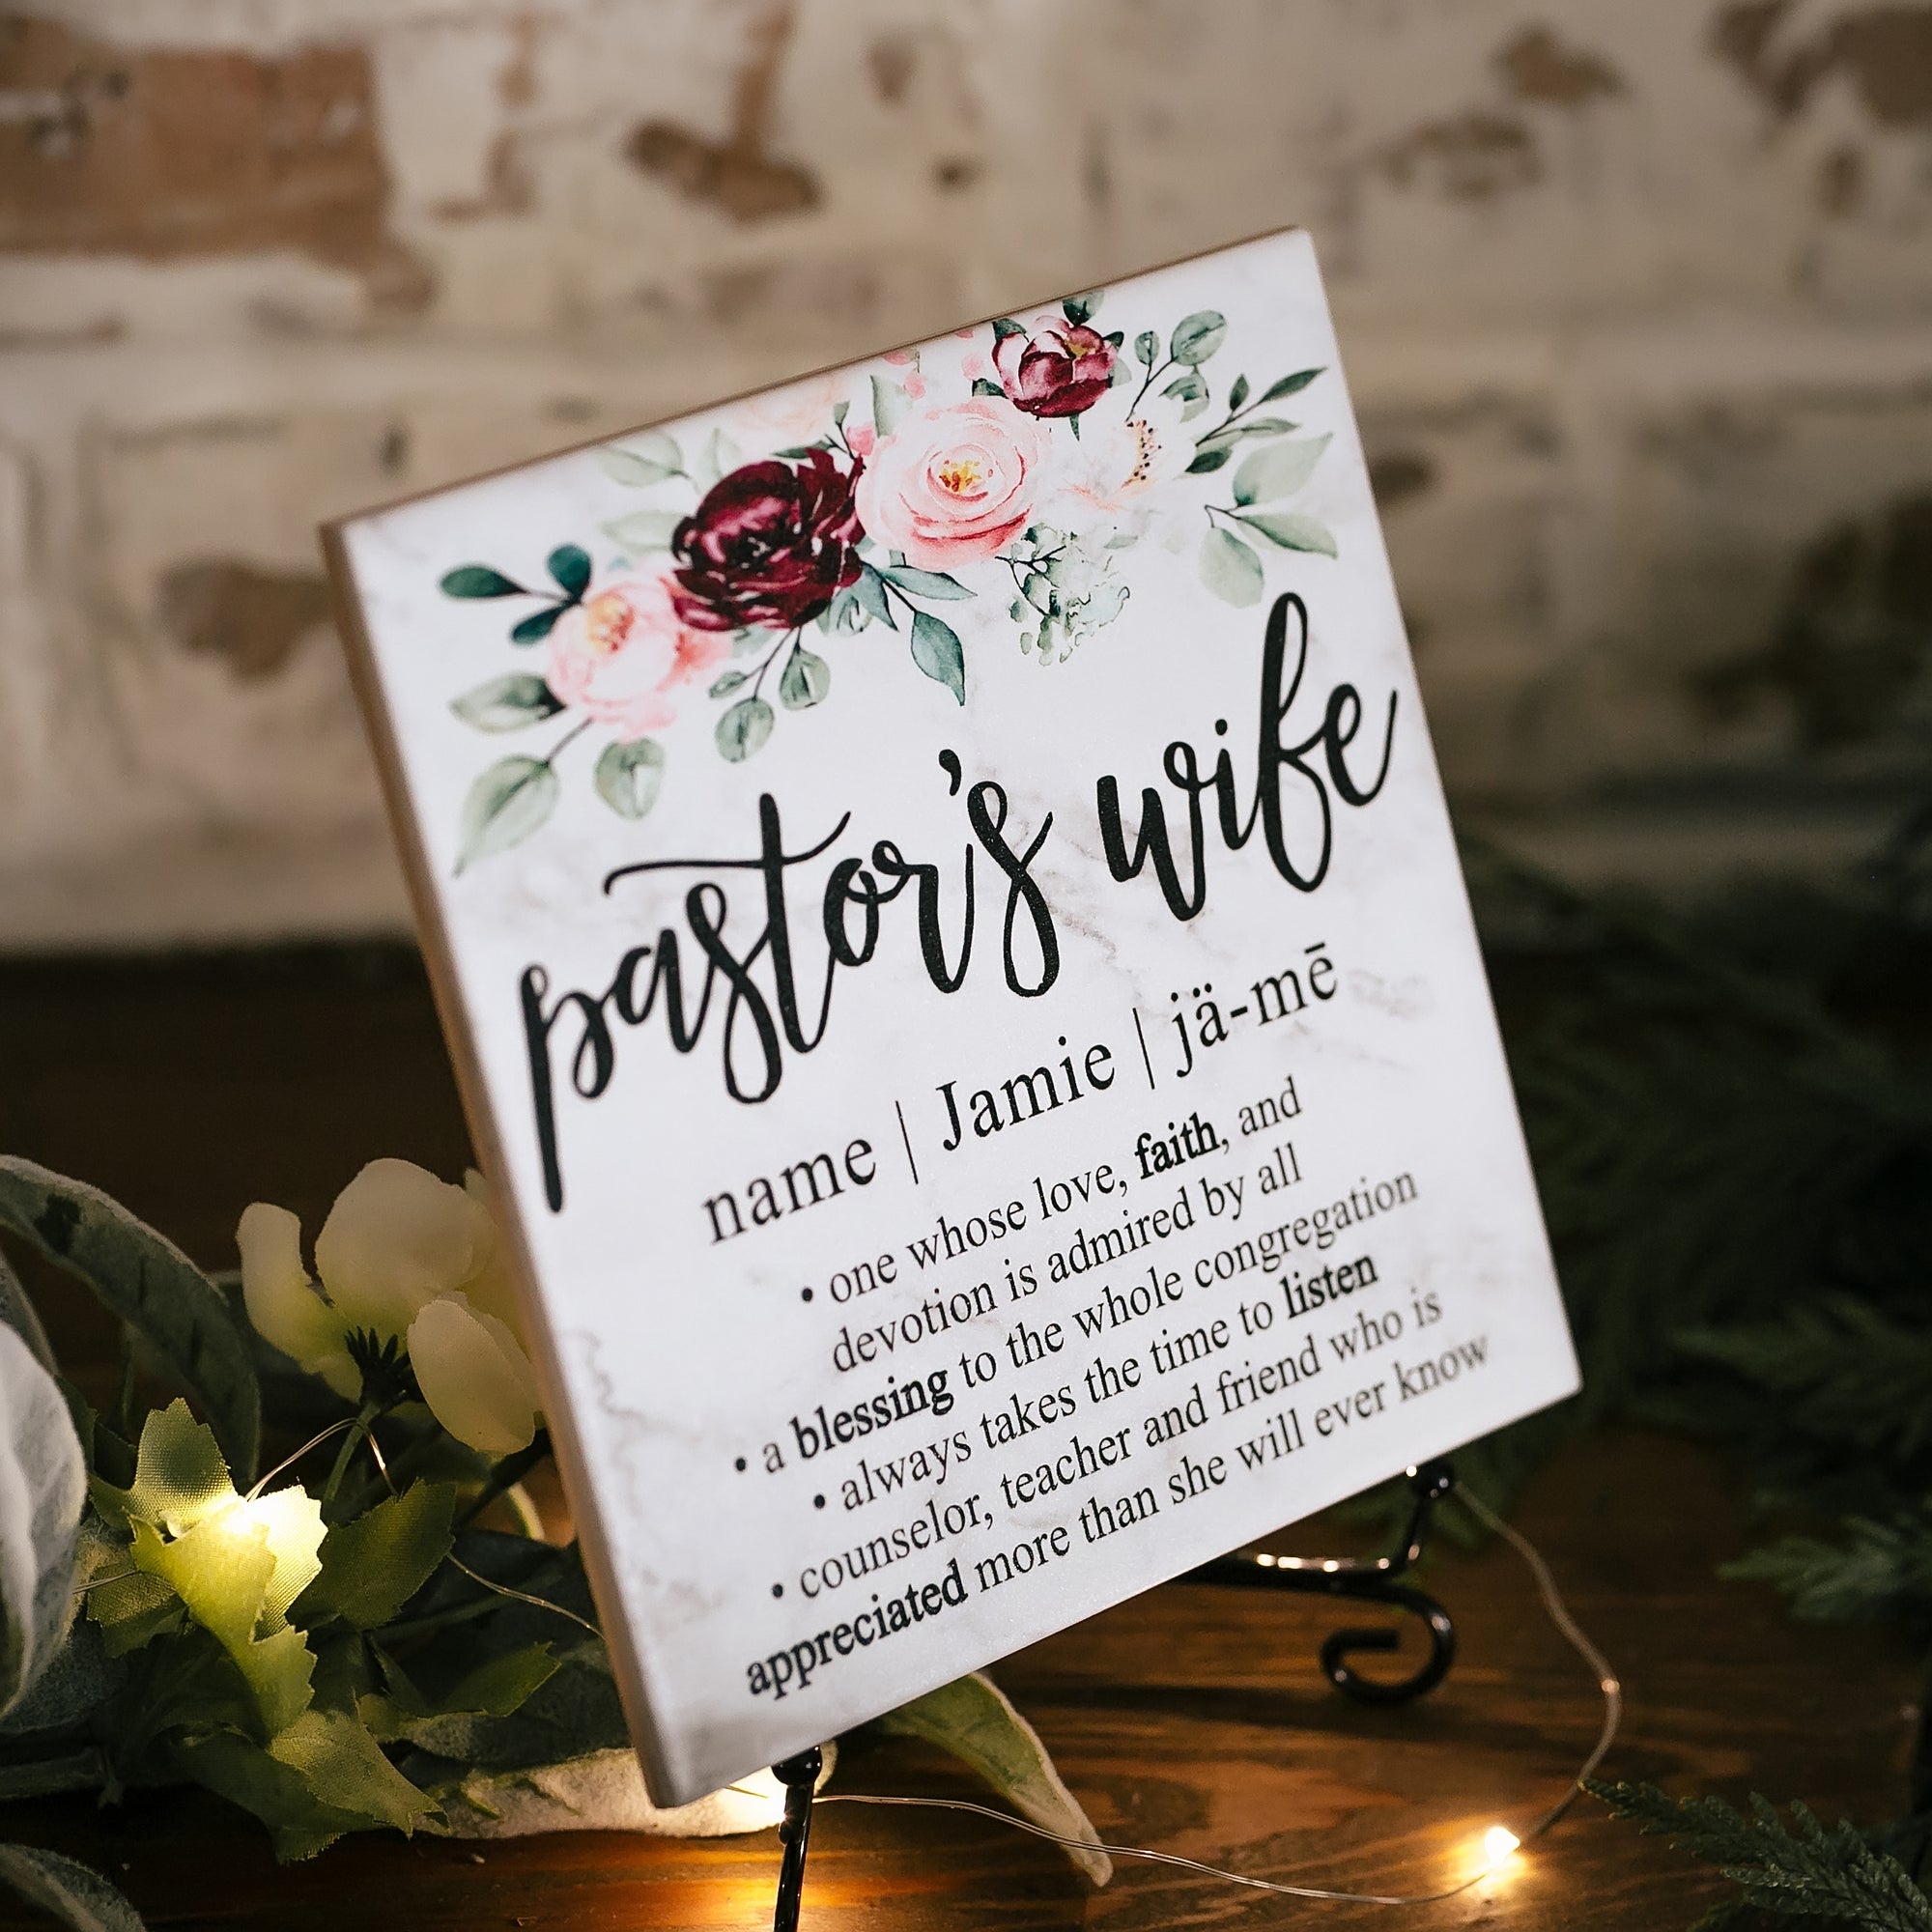 Pastor's Wife Dictionary Definition Quote Art Tile Plaque